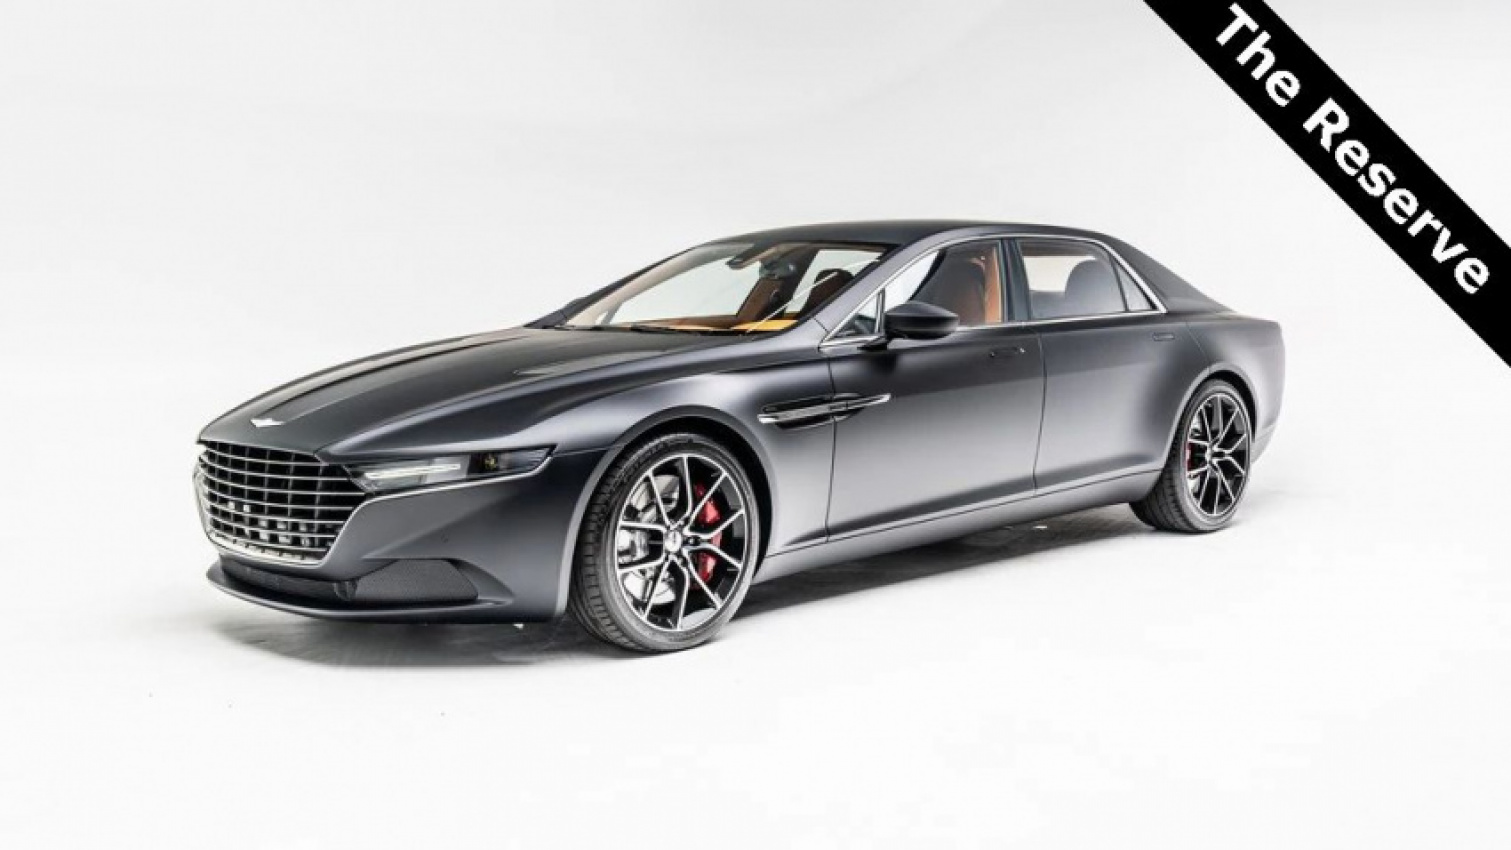 aston martin, autos, cars, news, aston martin lagonda, used cars, out of 200 aston martin lagonda tarafs ever made, two are for sale right now